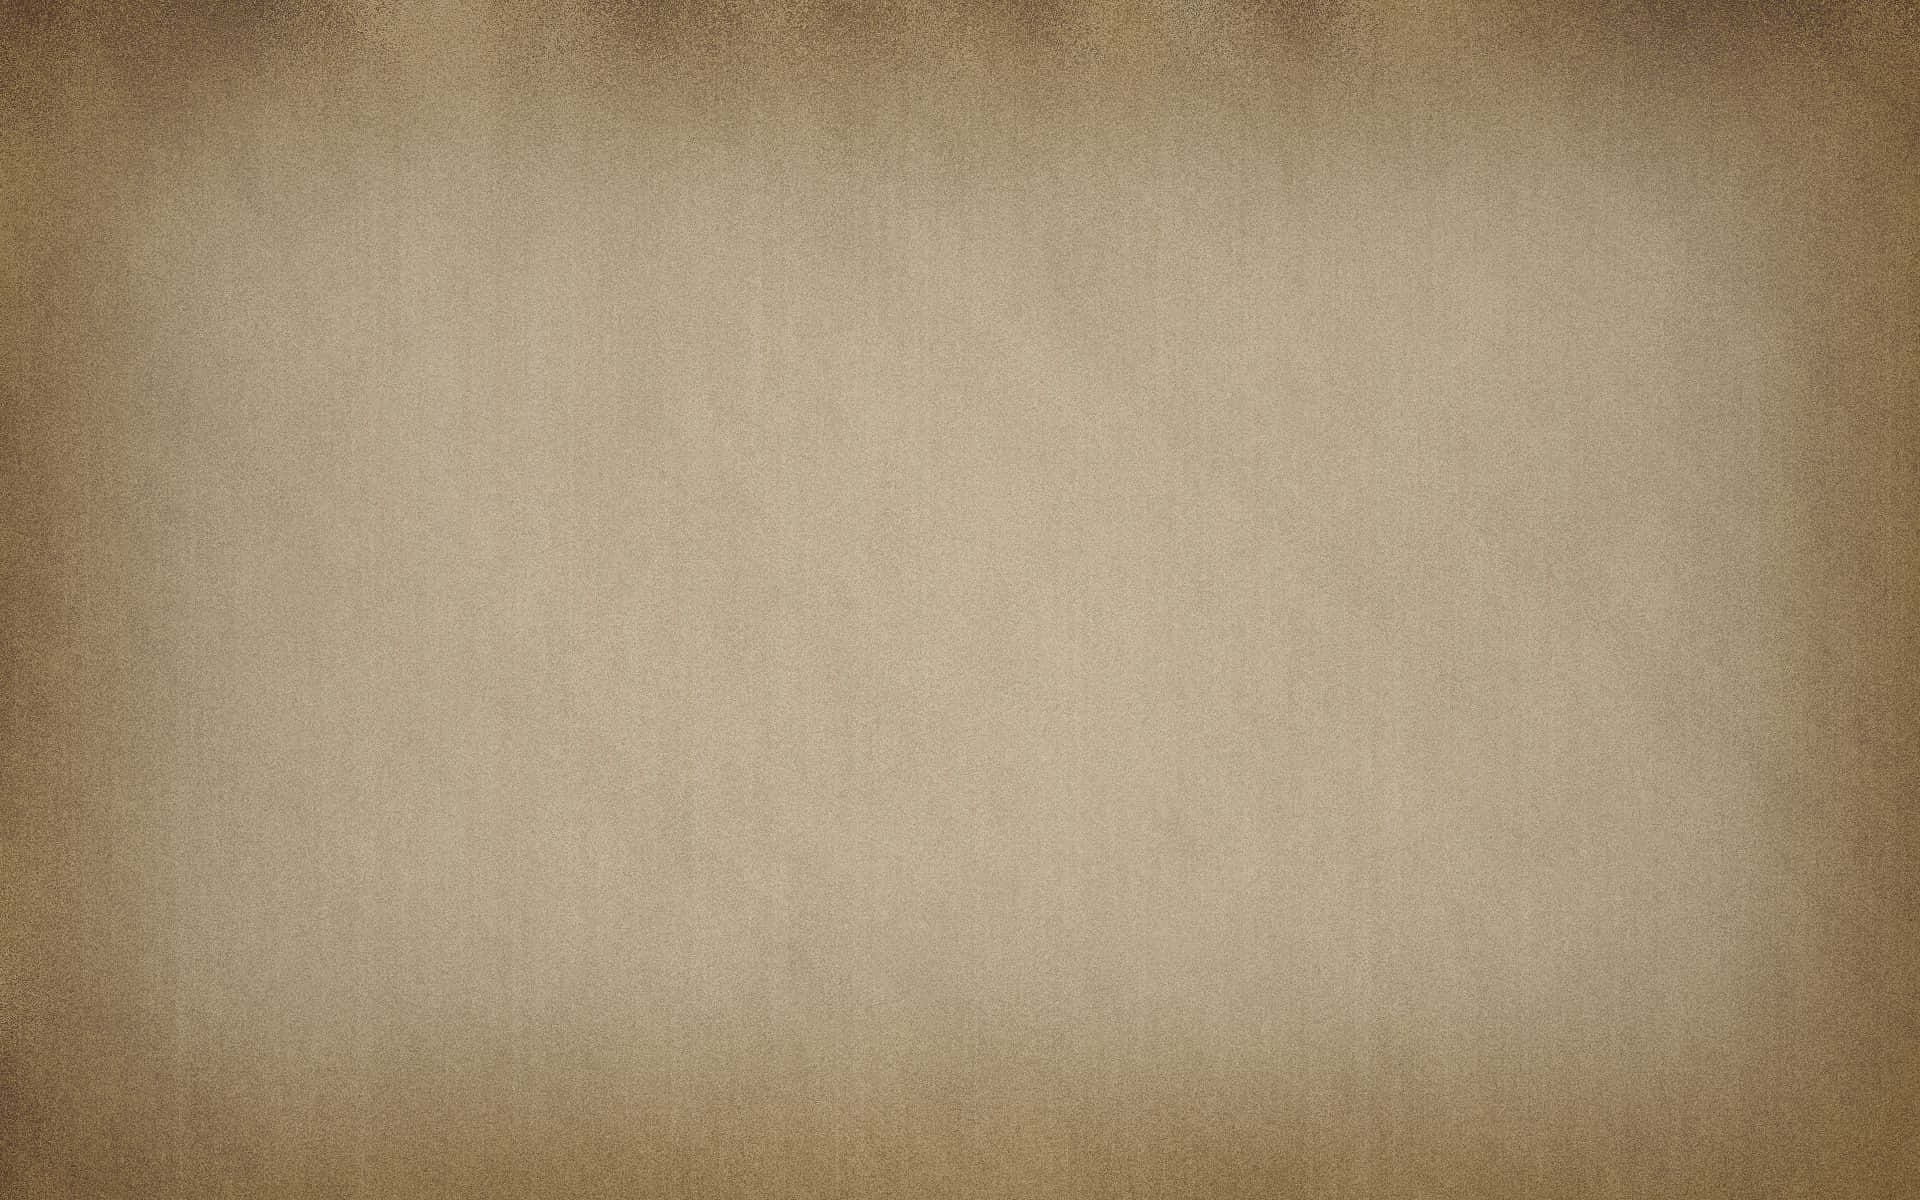 A cheerful, light brown background that brightens any space